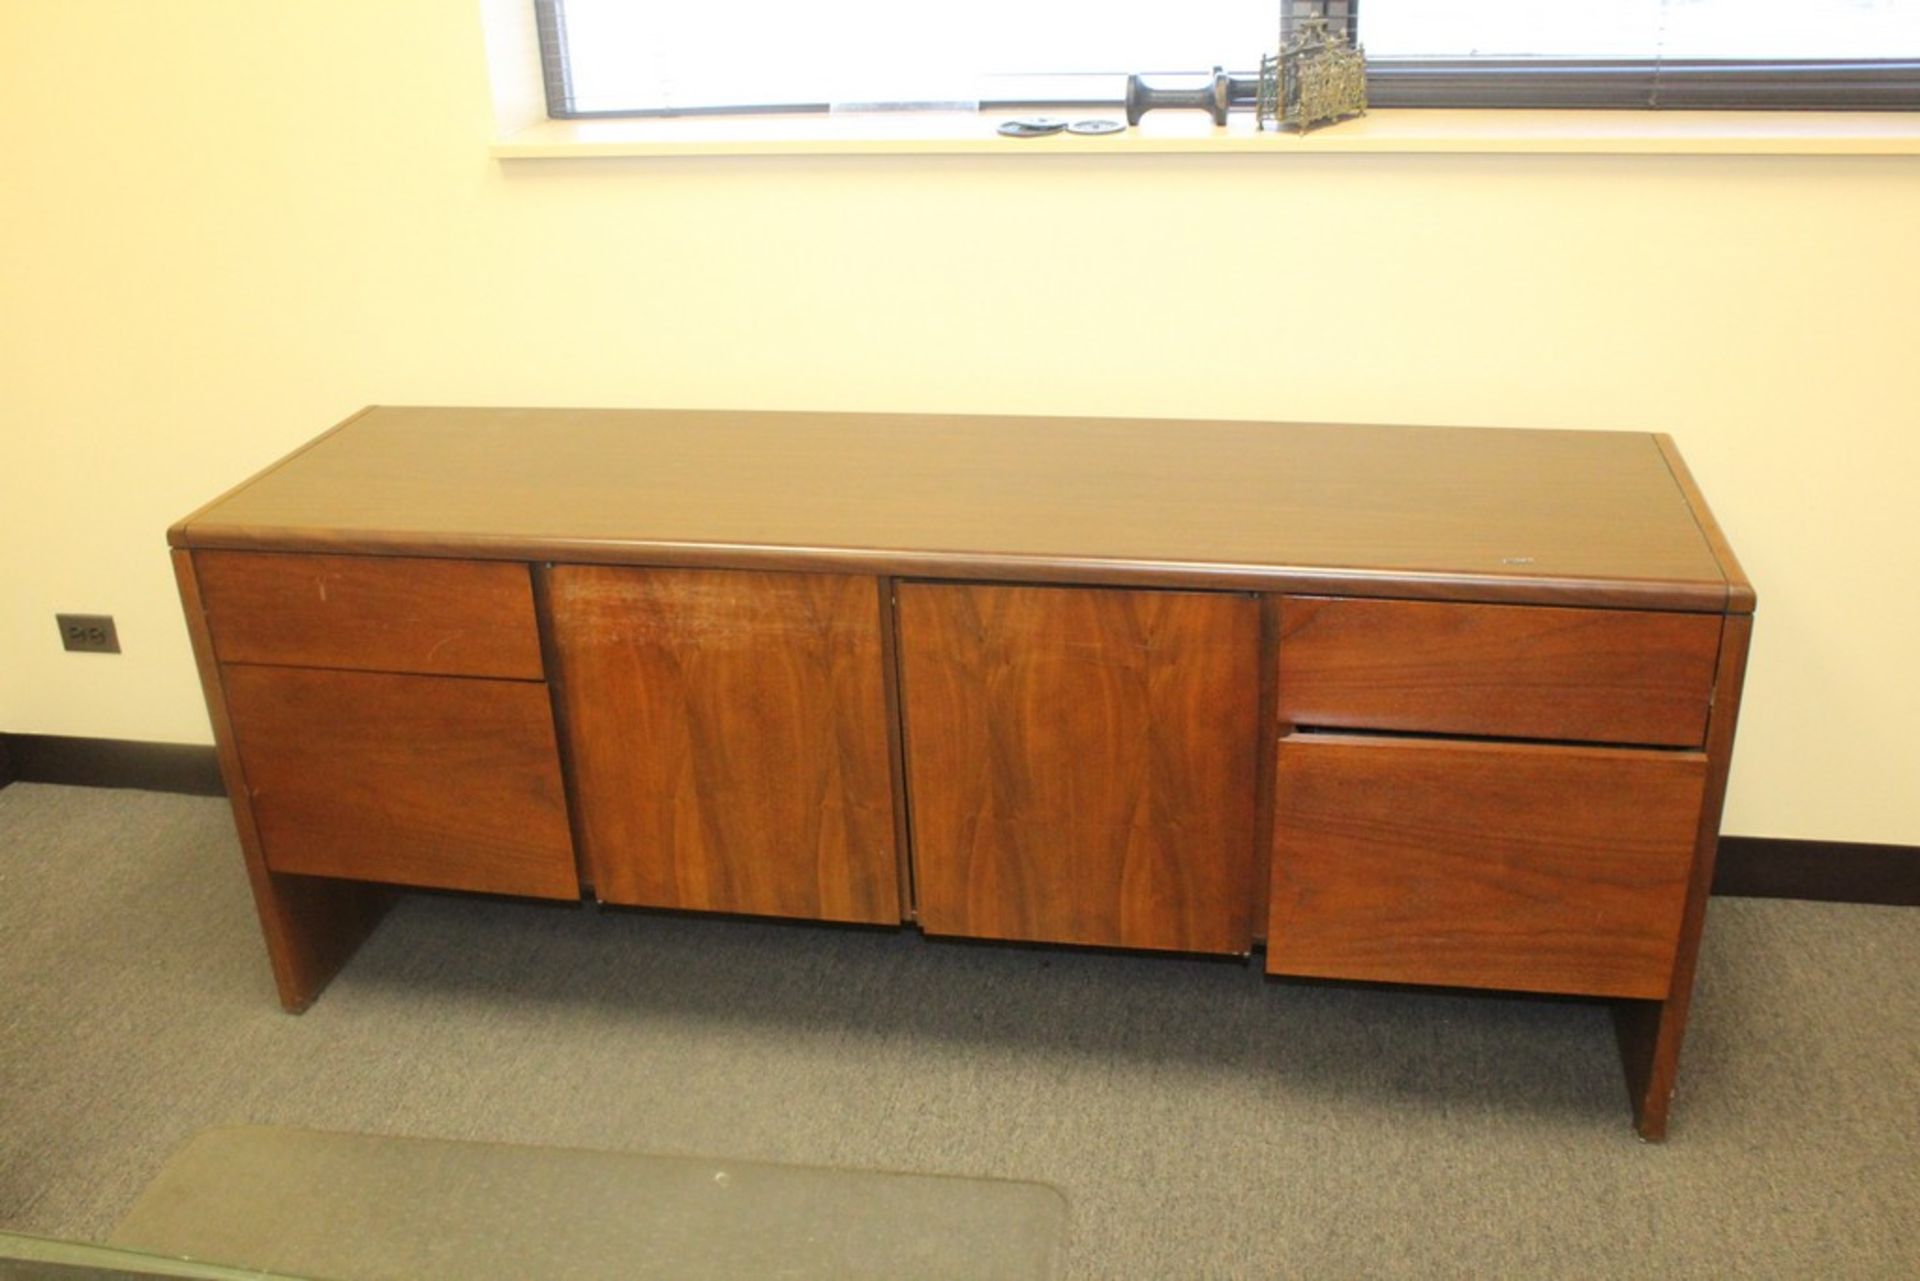 GLASS EXECUTIVE DESK - 72" X 30" X 29" AND WOOD CREDENZA - 29" X 72" X 20" - Image 3 of 3